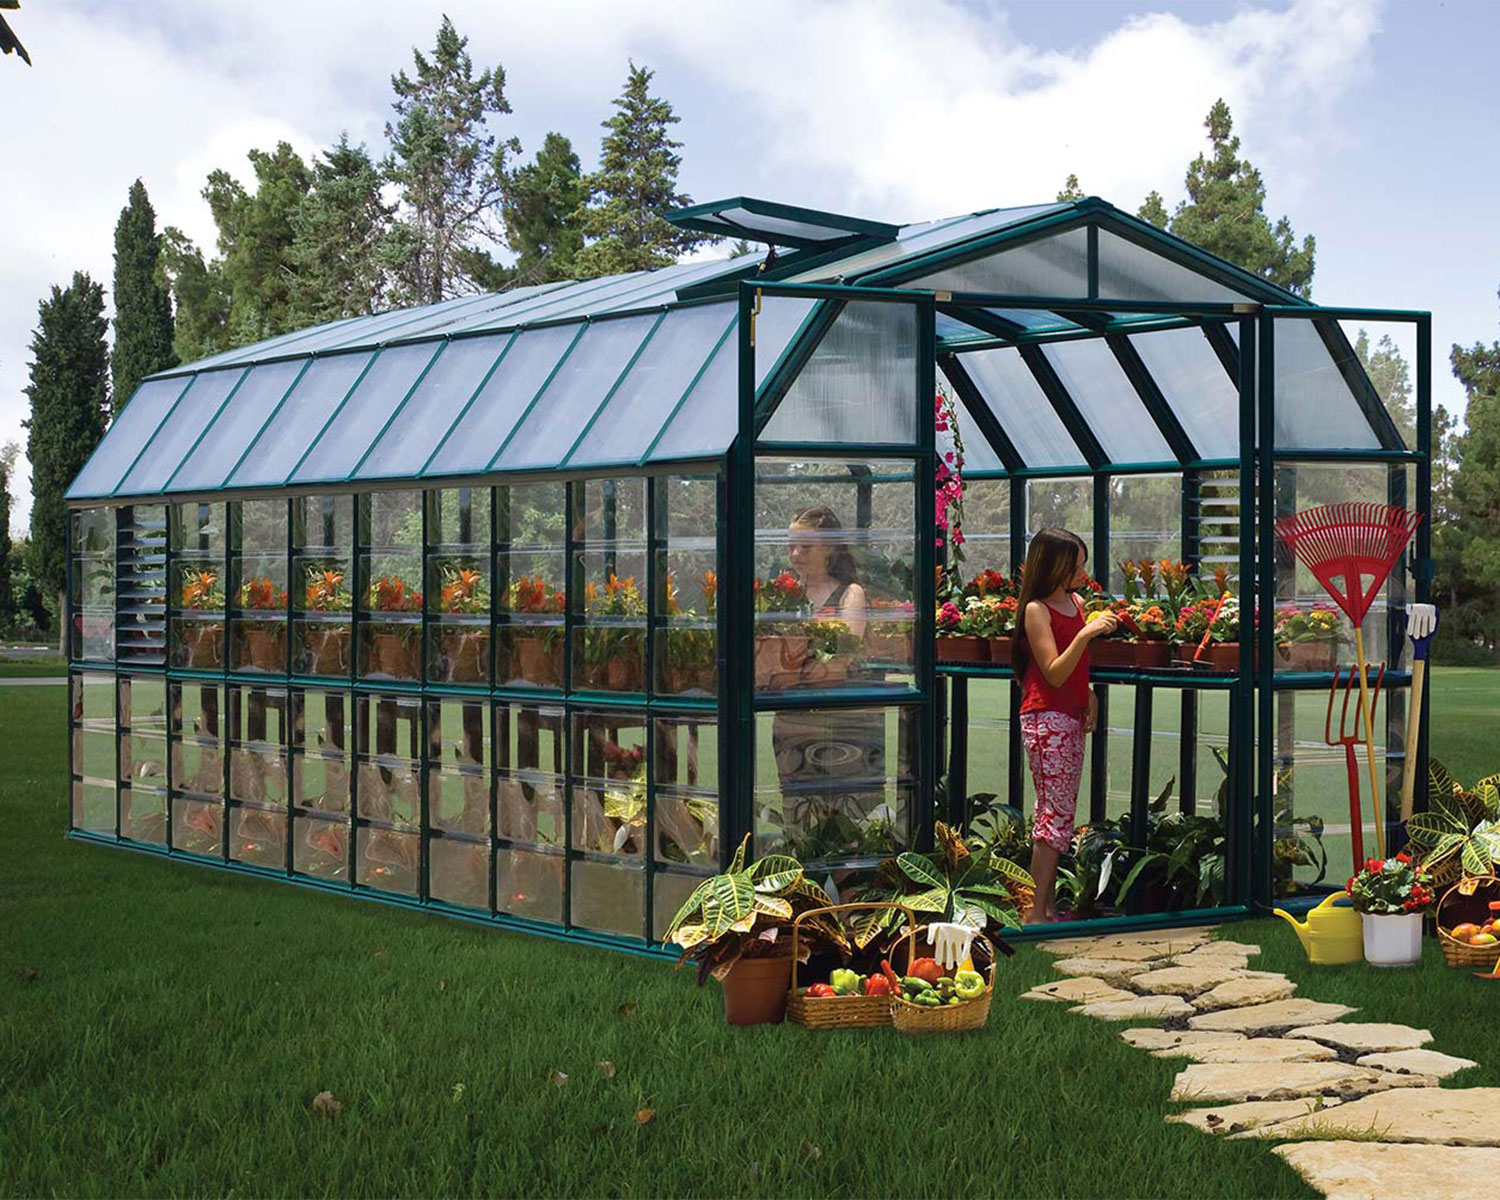 Prestige 8 ft. x 20 ft. Greenhouse Green Structure & Clear Wall Panels growing plants